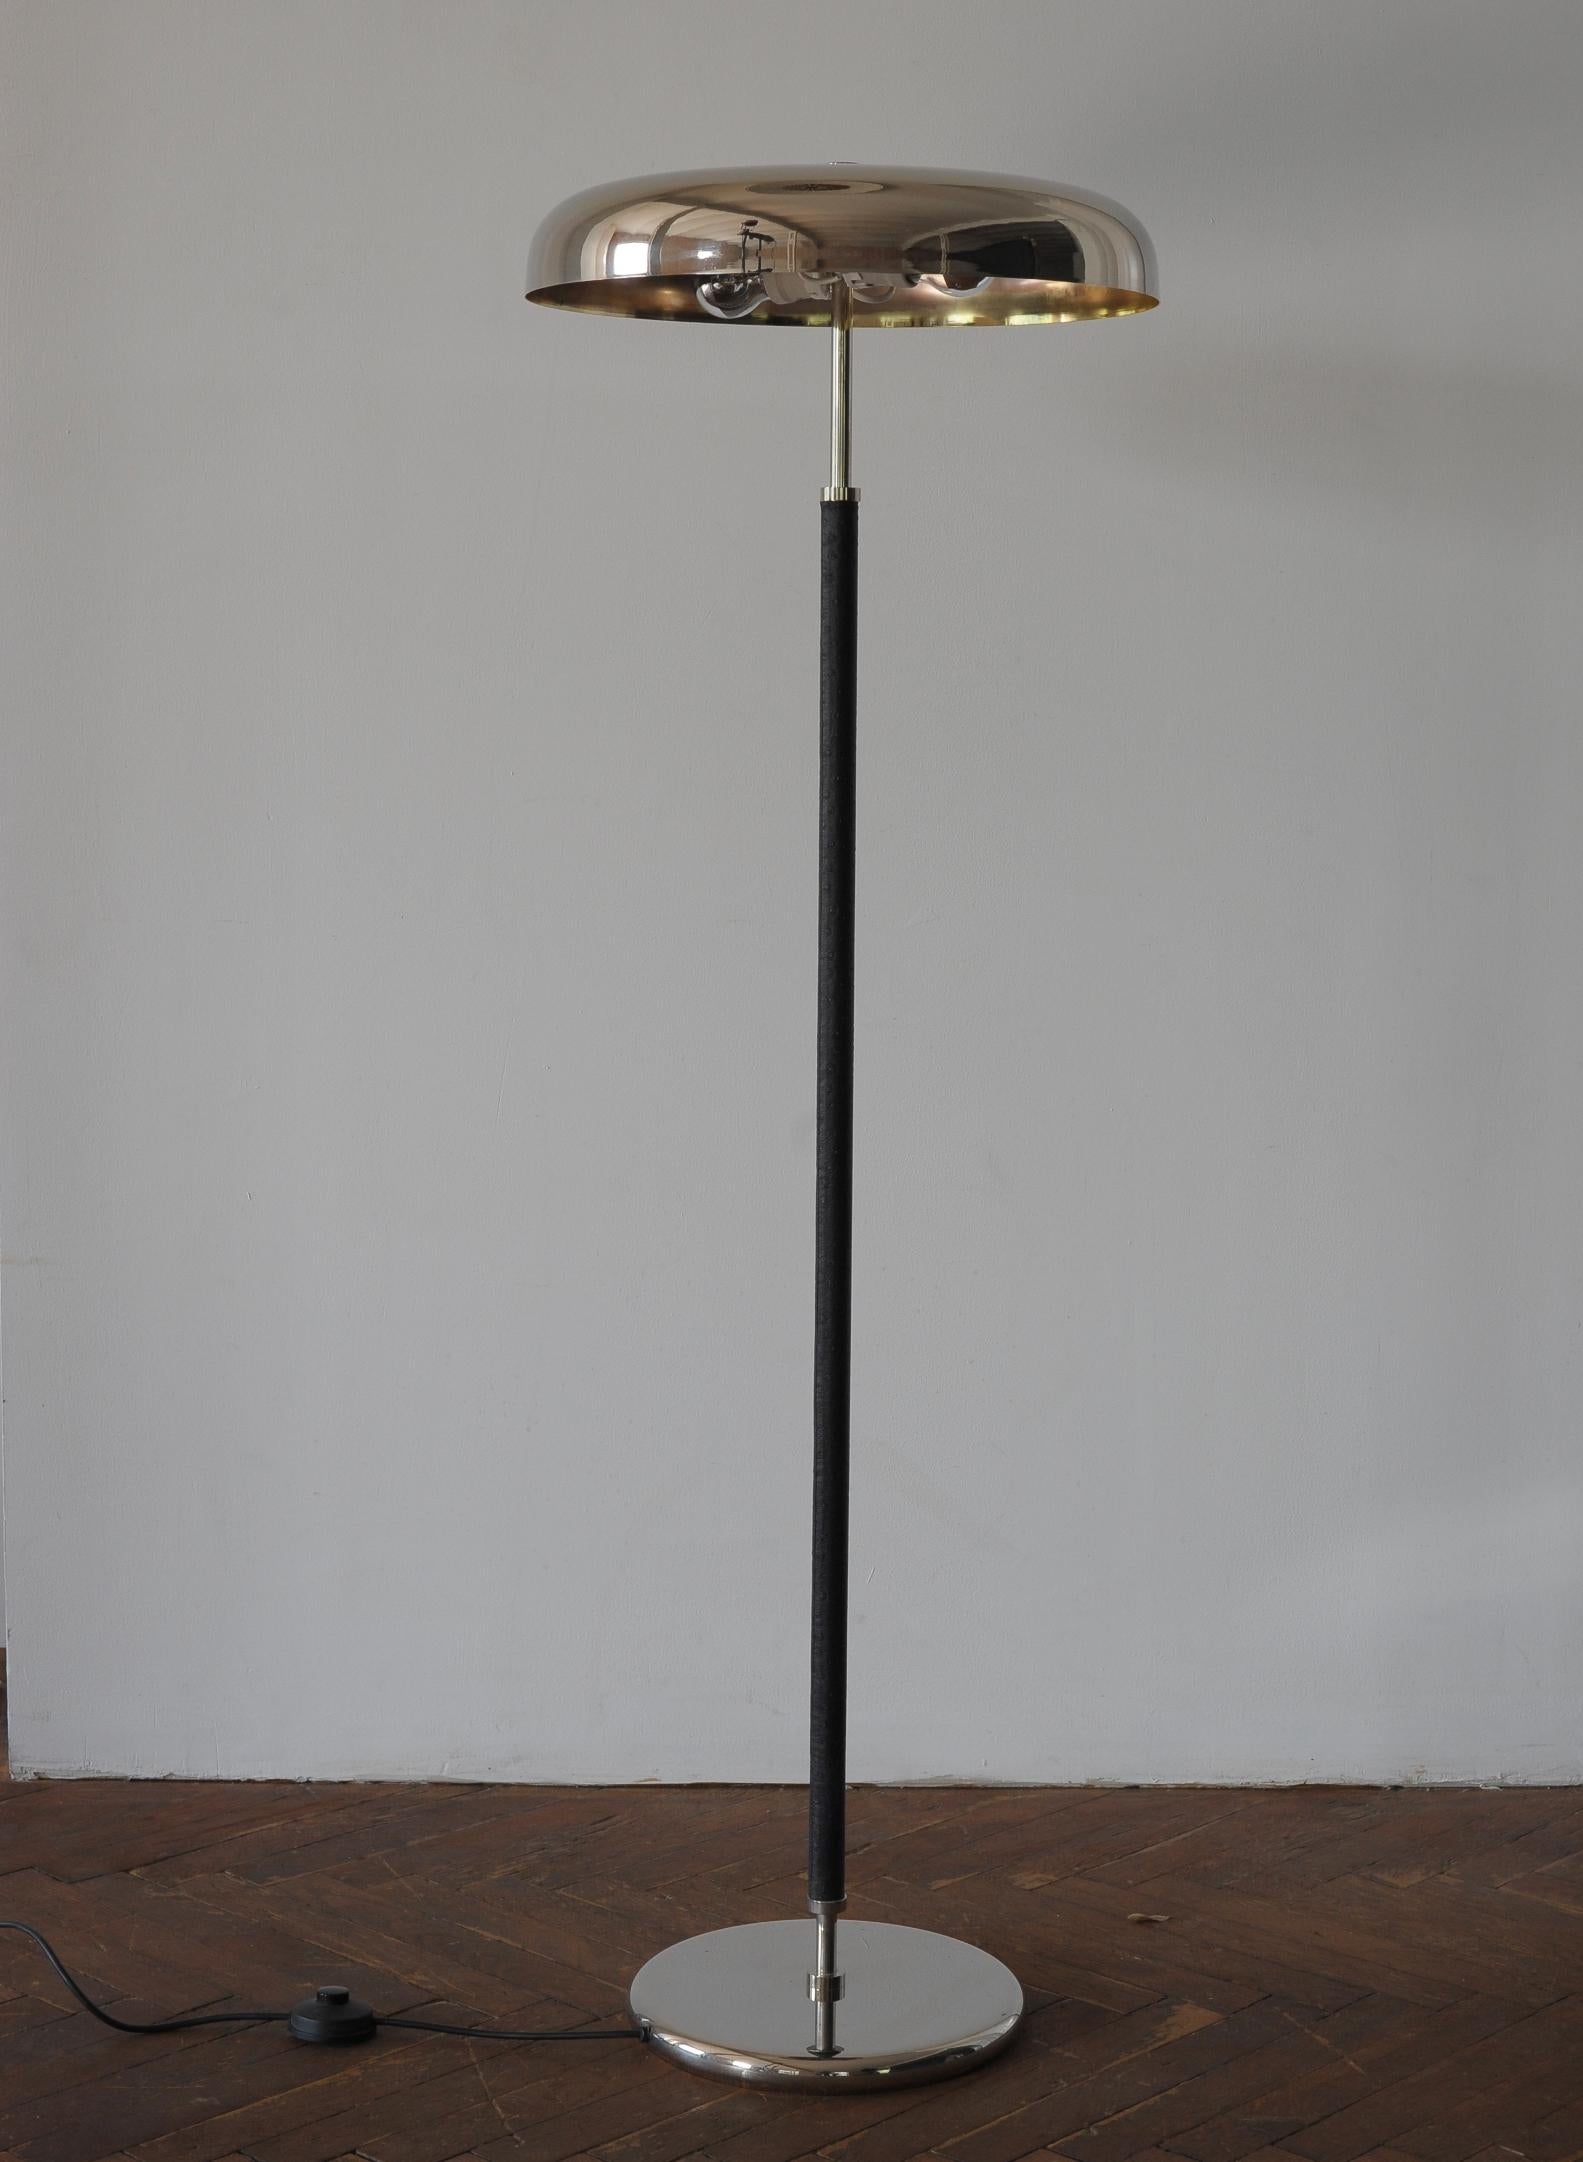 Plated 20th Century Art Deco Leather Clad Floor Lamp For Sale